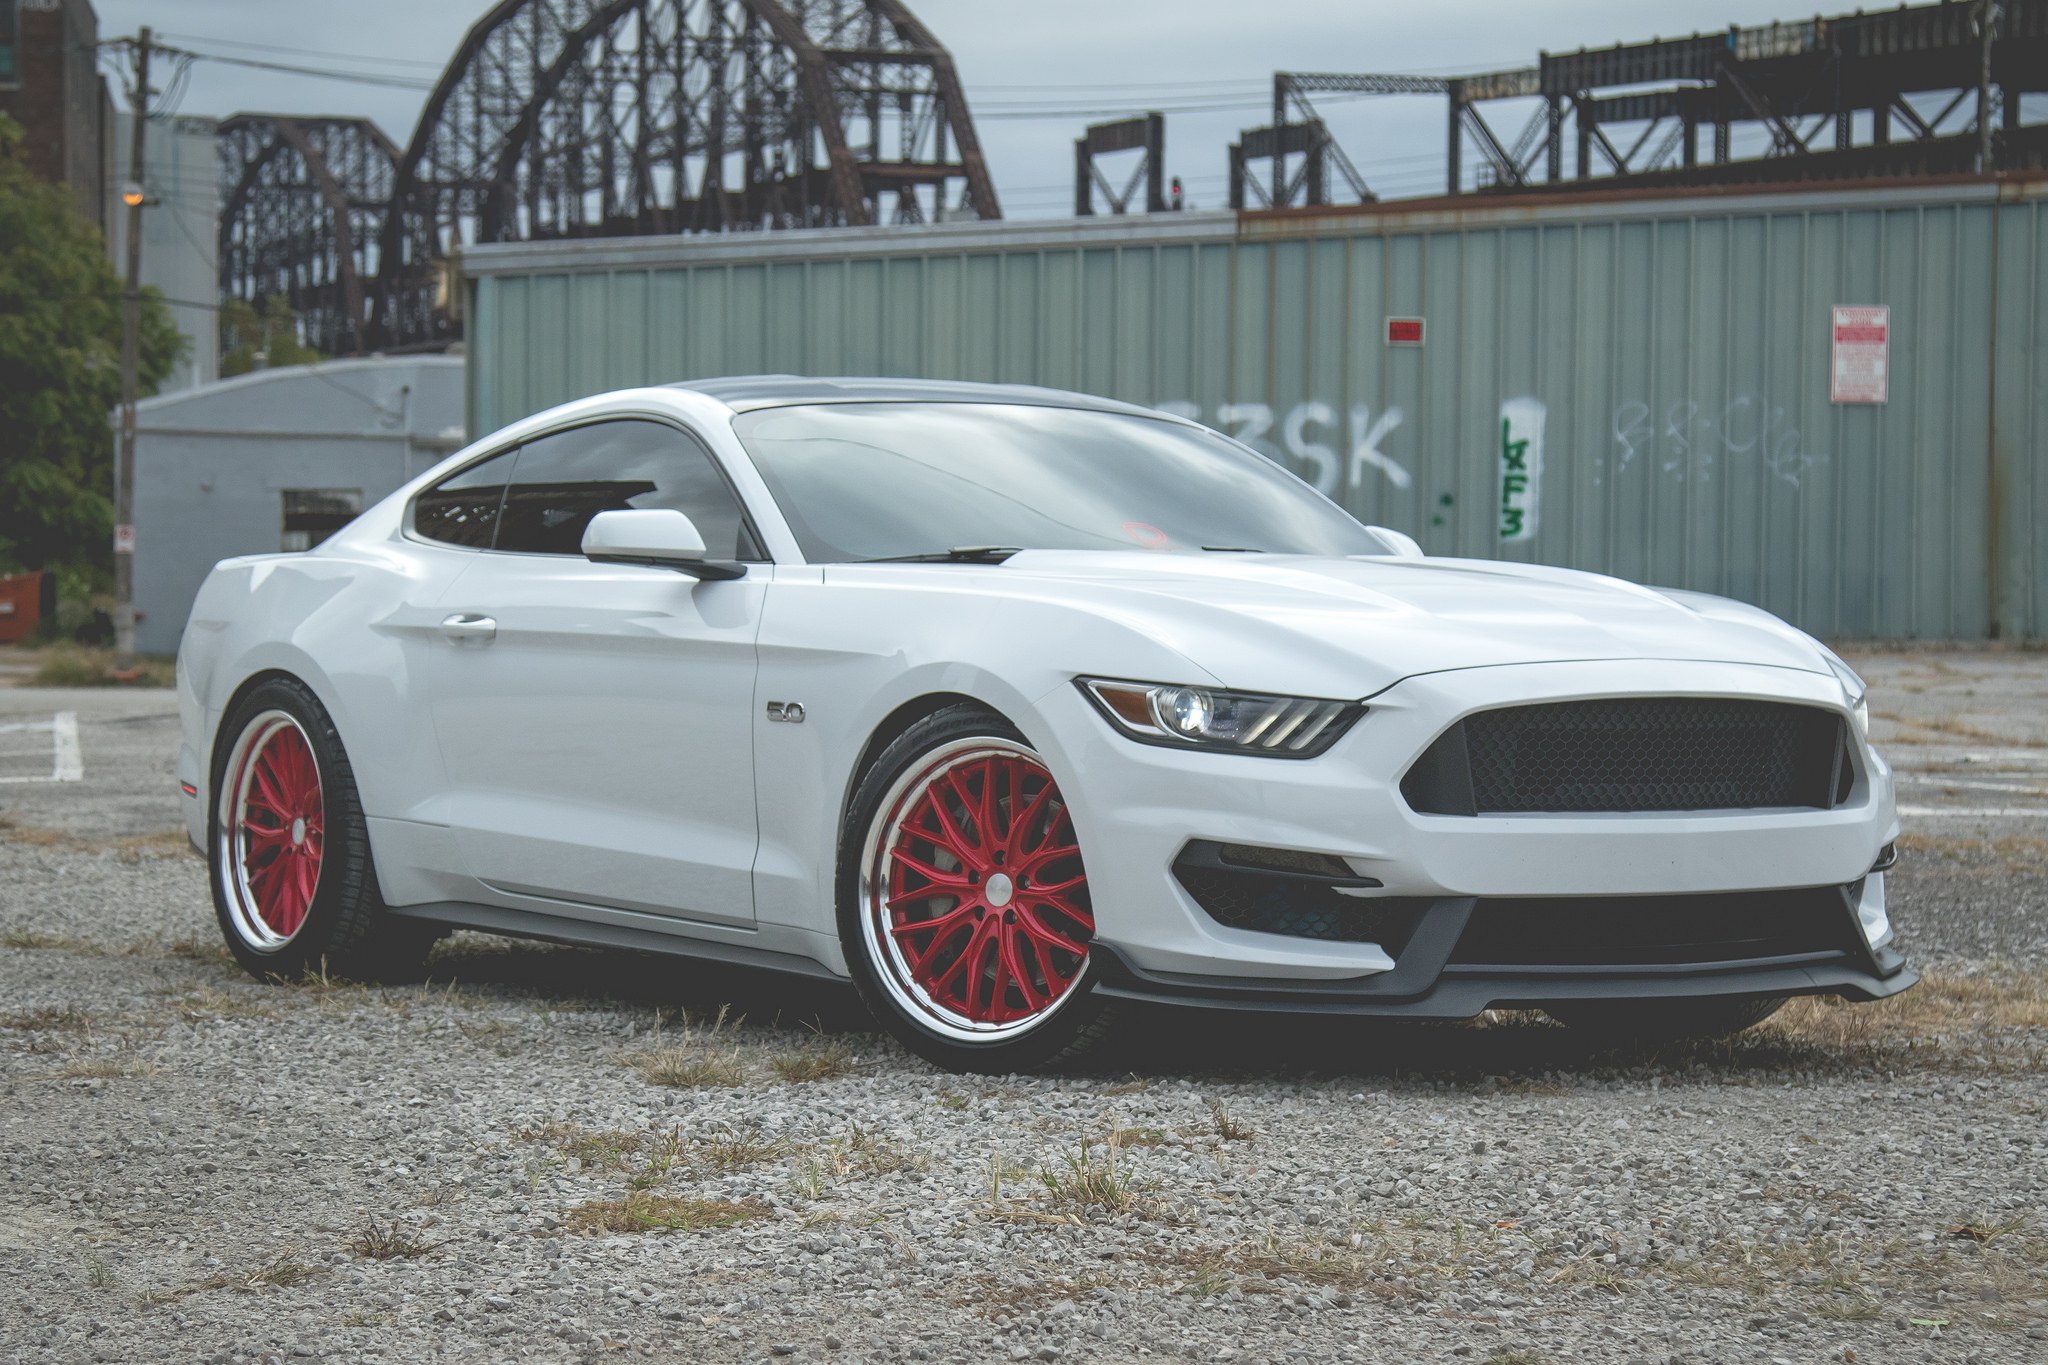 Aftermarket Projector Headlights on White Ford Mustang - Photo by Vossen